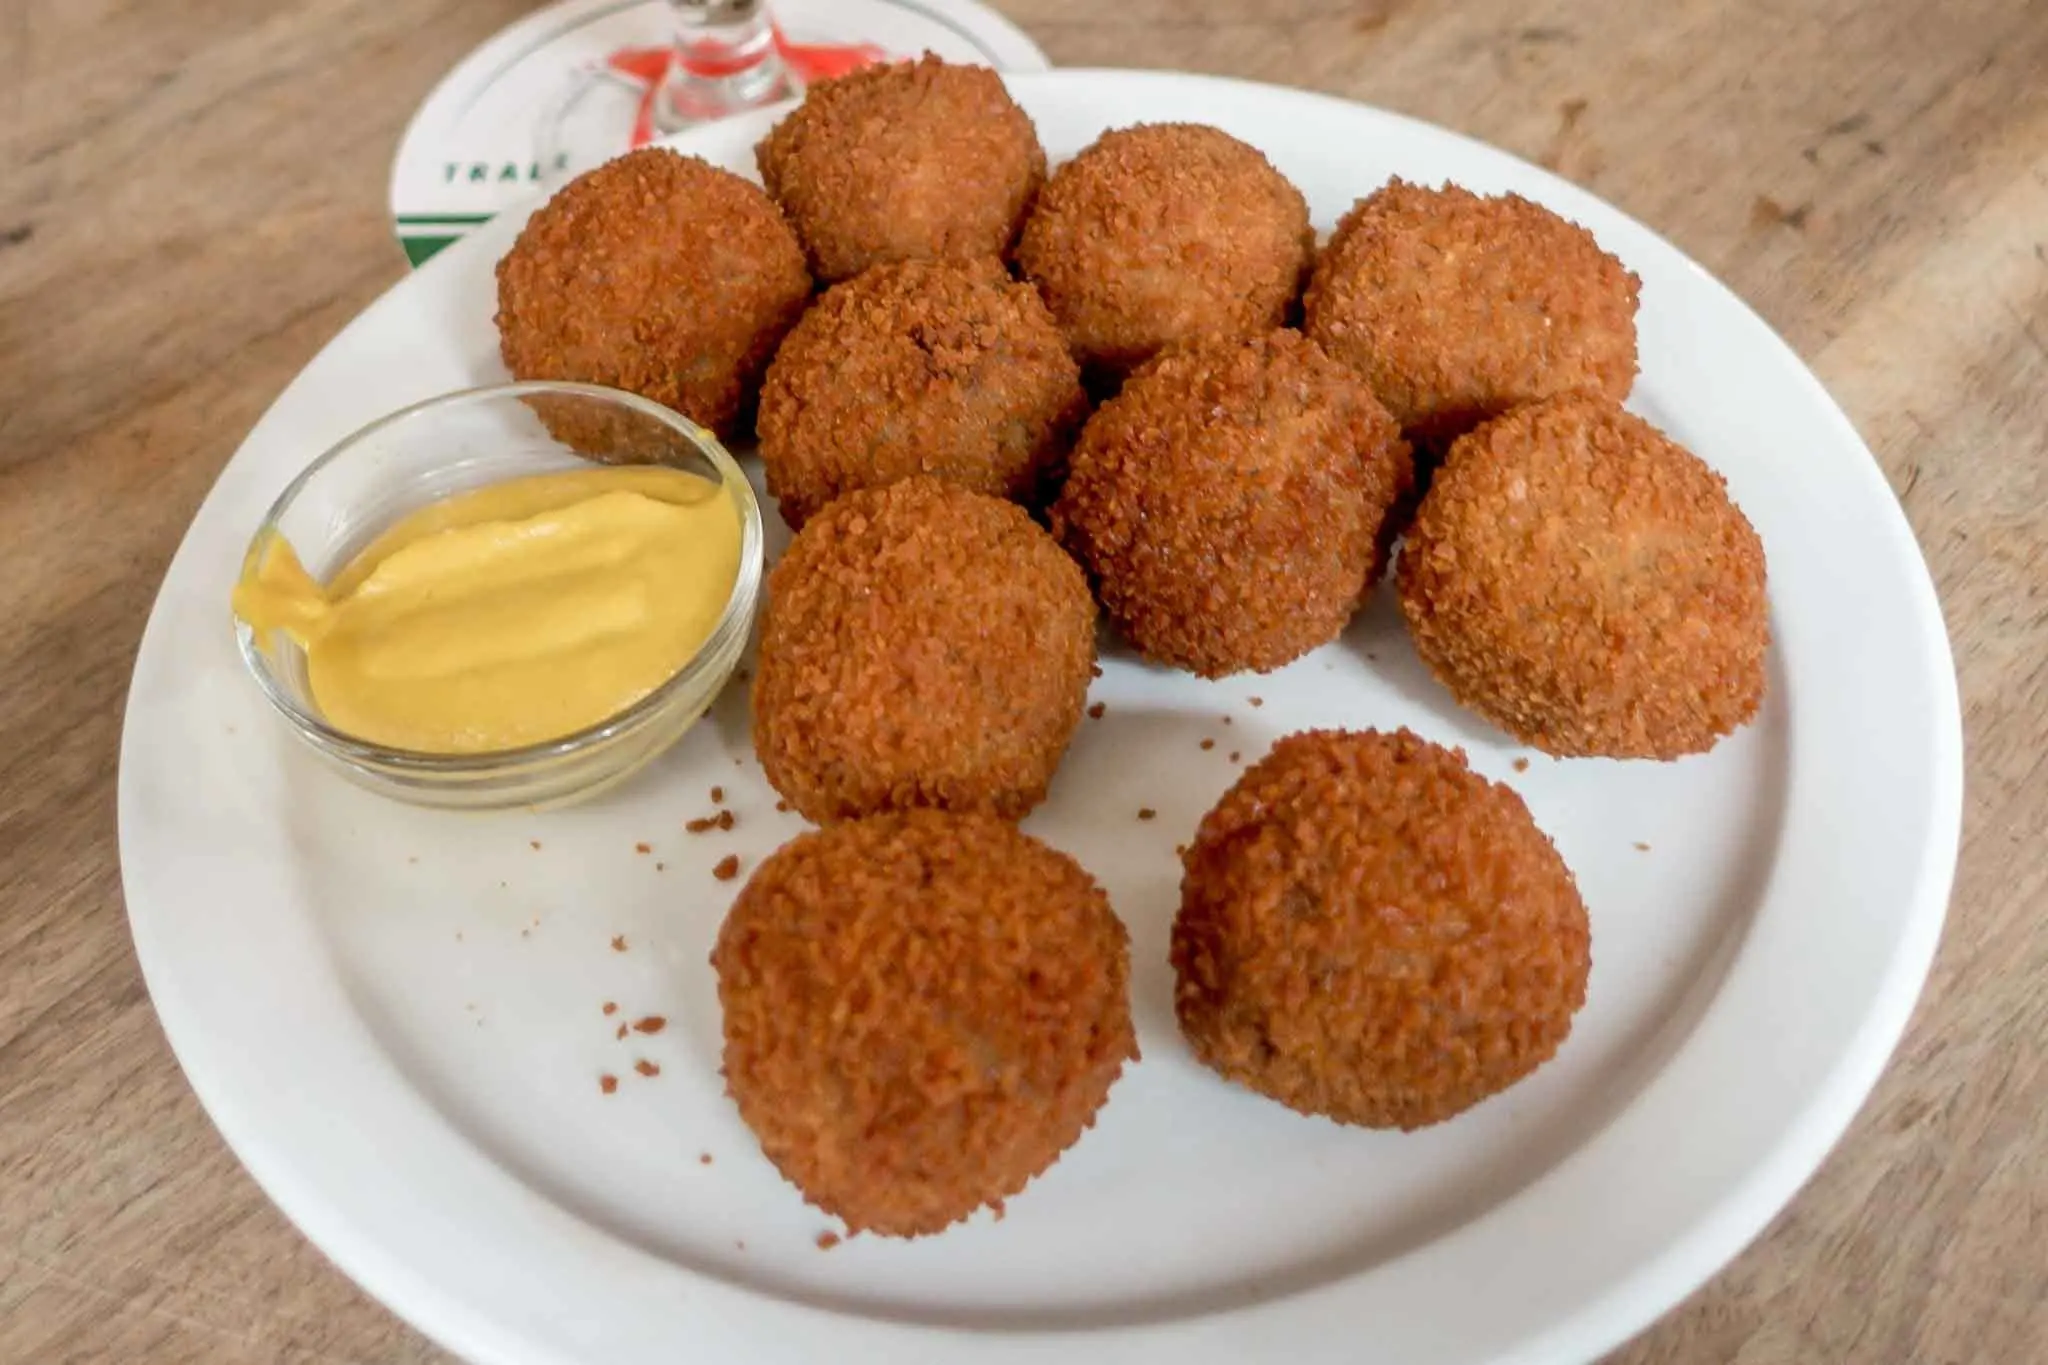 Fried balls of bitterballen with mustard on a plate